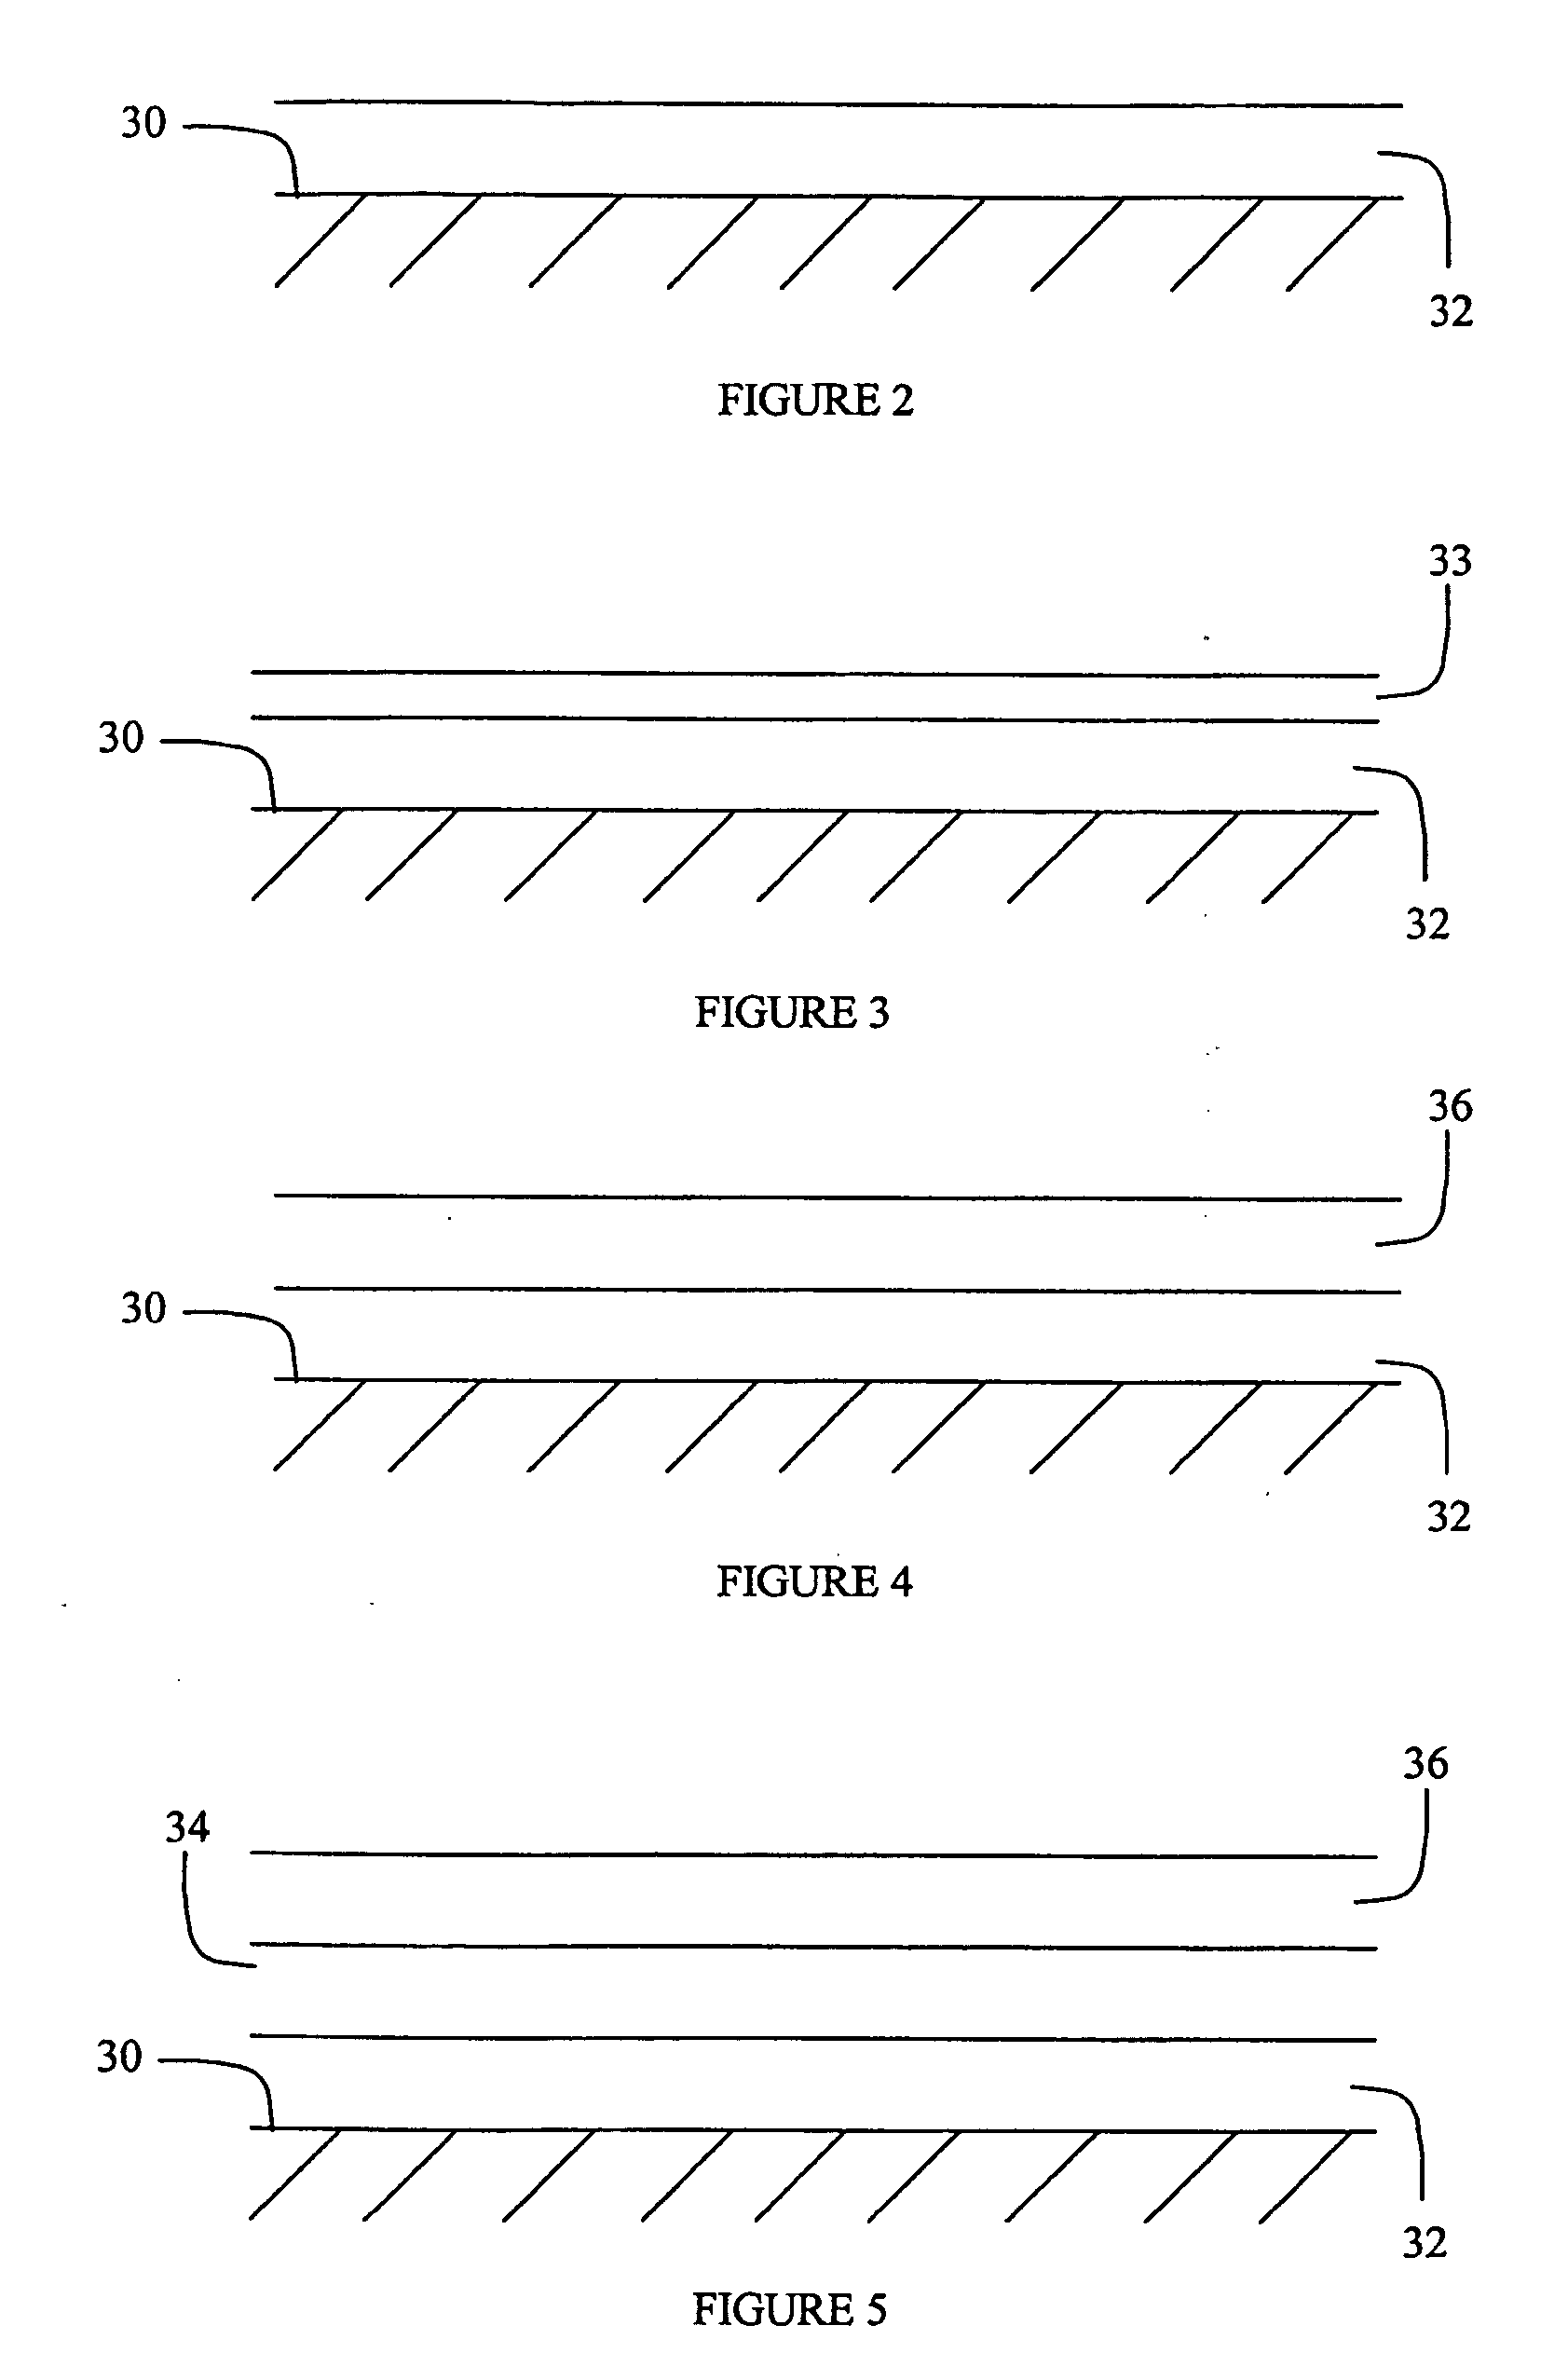 Bond coating and thermal barrier compositions, processes for applying both, and their coated articles